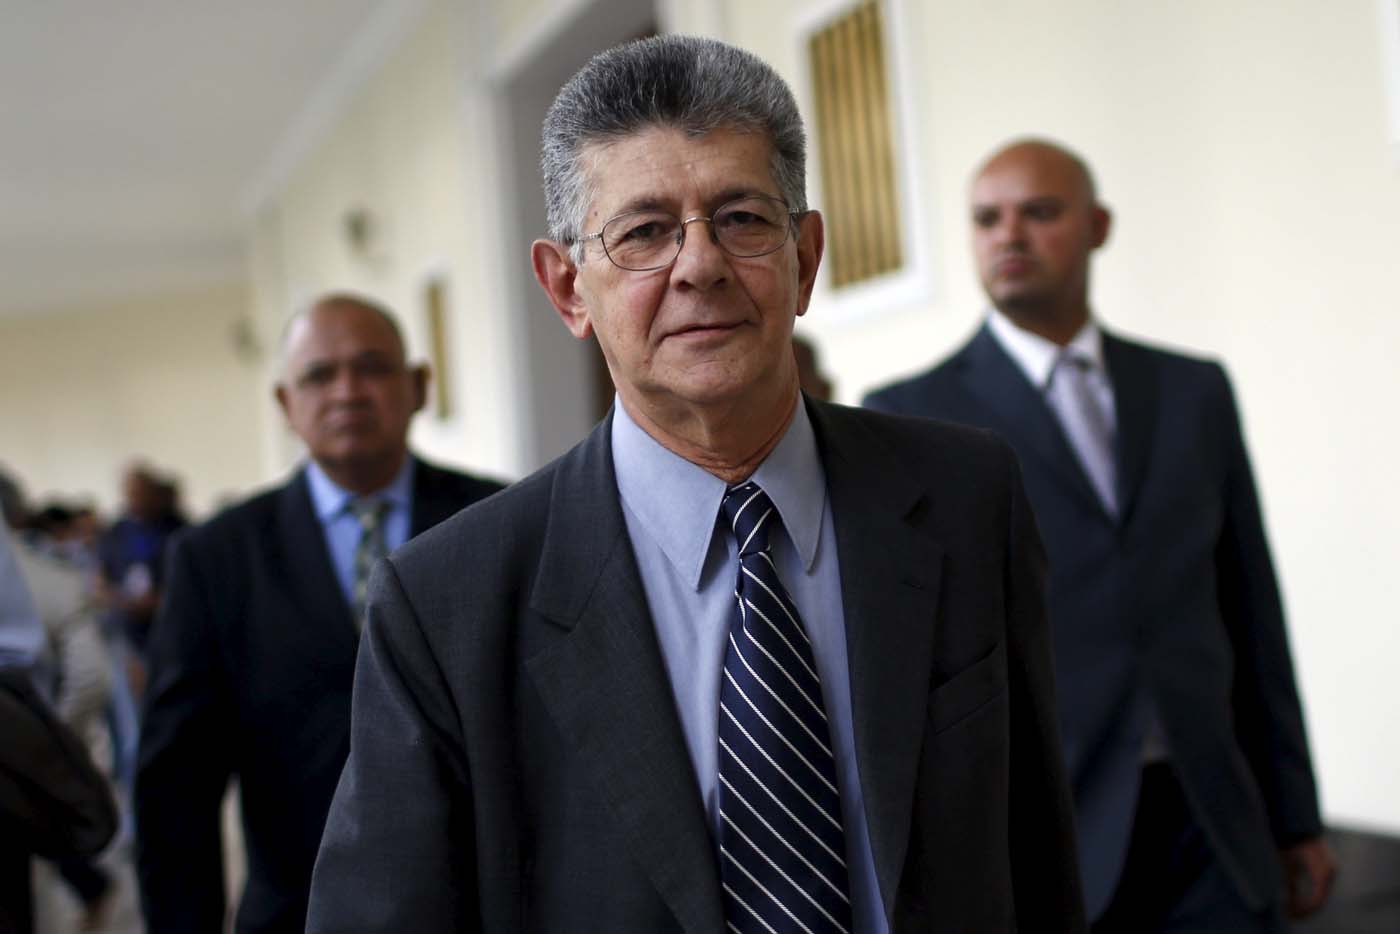 Henry Ramos Allup, president of the National Assembly and deputy of the Venezuelan coalition of opposition parties (MUD), walks at the National Assembly building during a session in Caracas